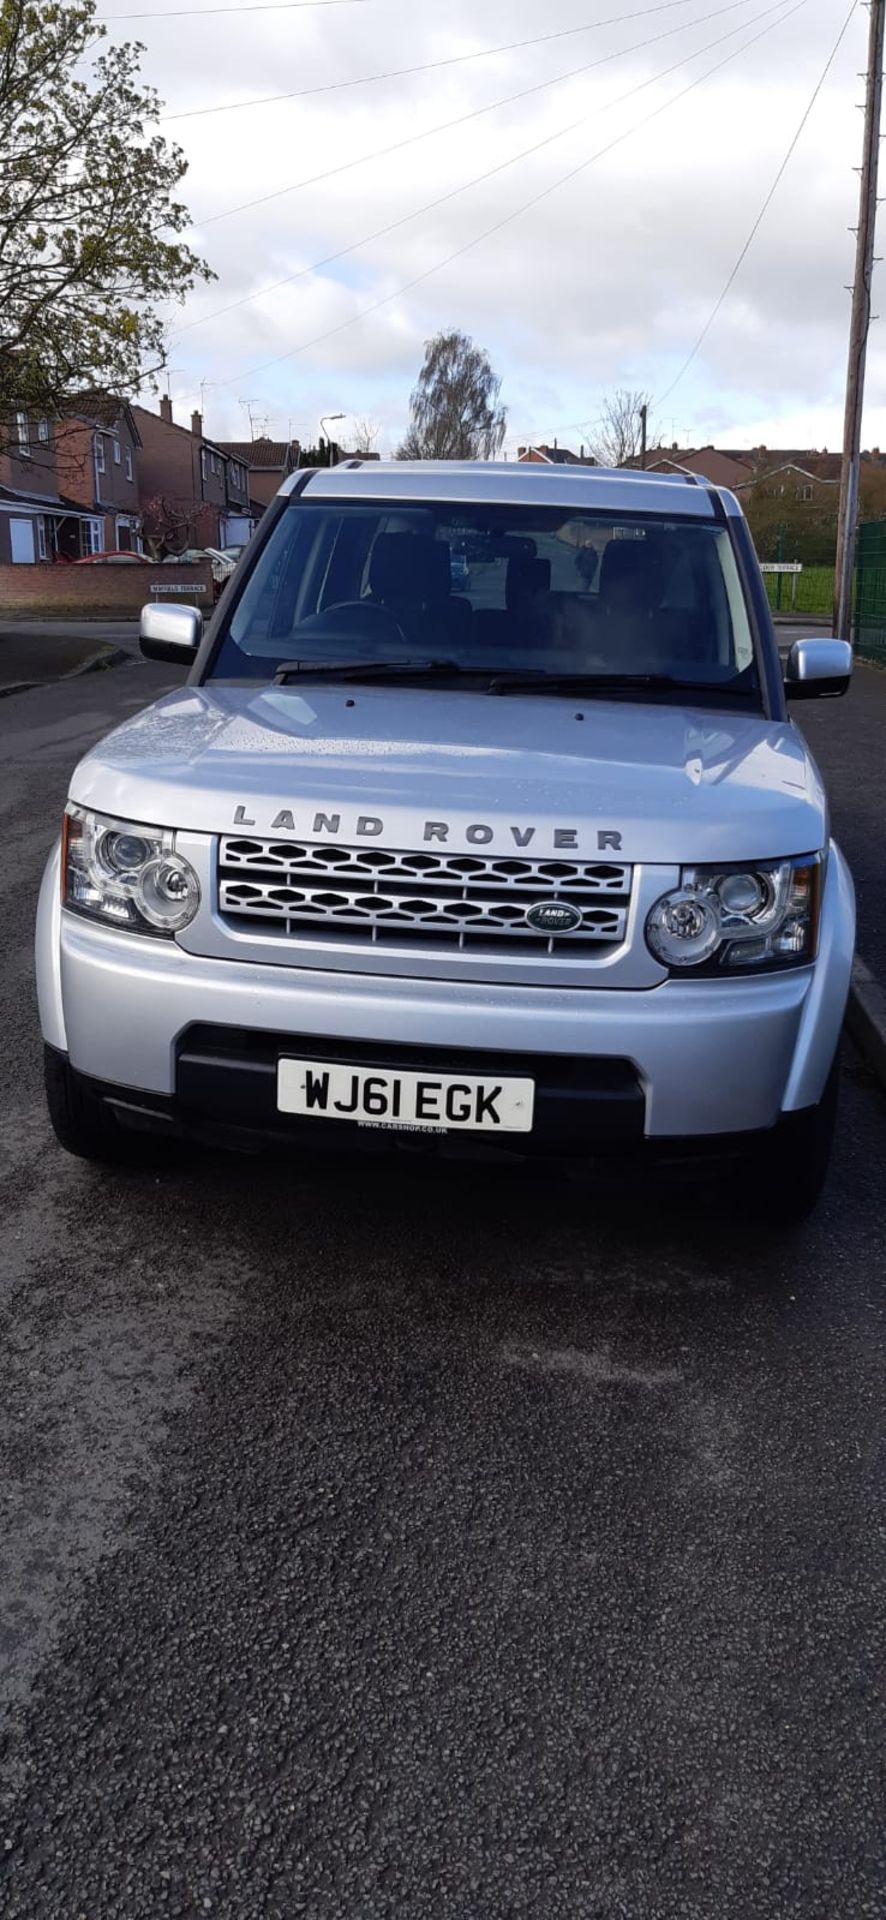 LAND ROVER DISCOVERY GS SDV6 AUTO 7 SEATER SILVER ESTATE, 127K MILES *NO VAT* - Image 3 of 16